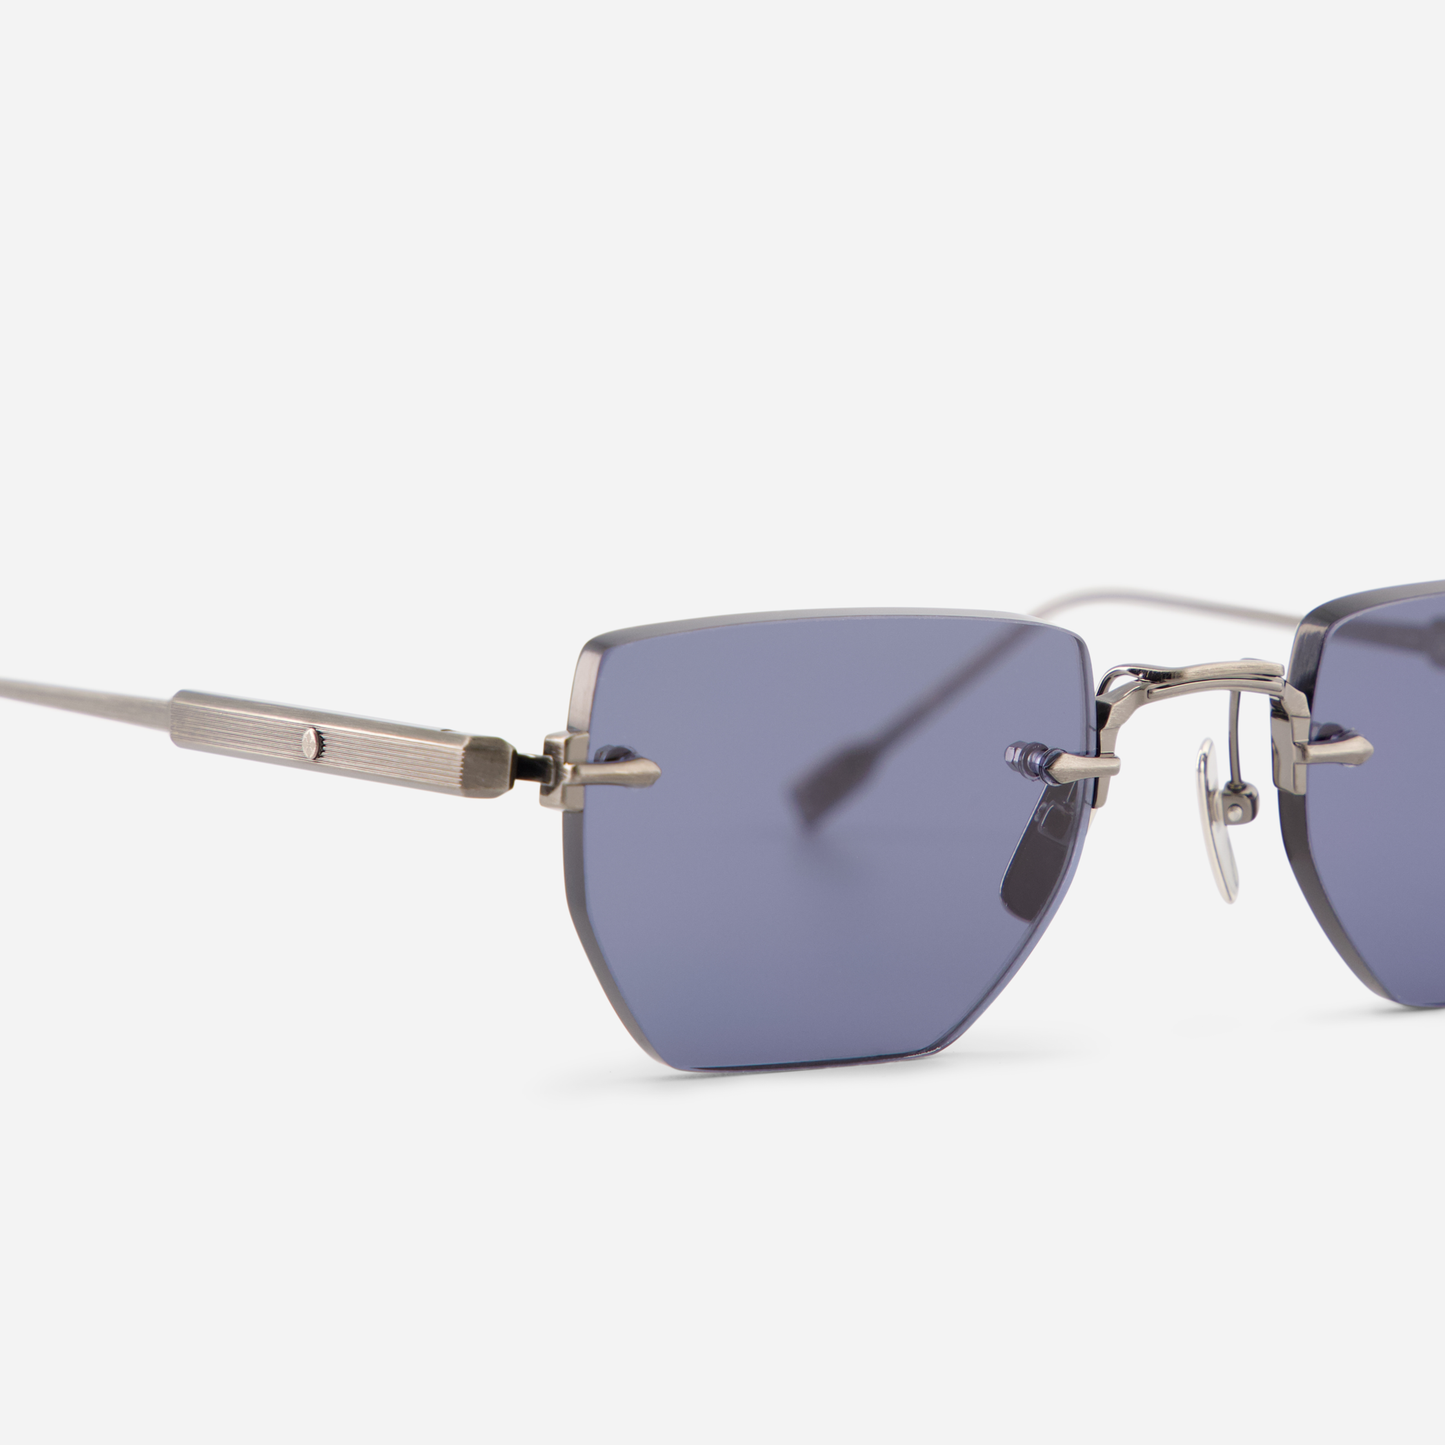 Terebellum III S808 from Sato's Rimless Collection, showcasing a Titanium frame in antique silver, complemented by stylish BL16 blue lenses.